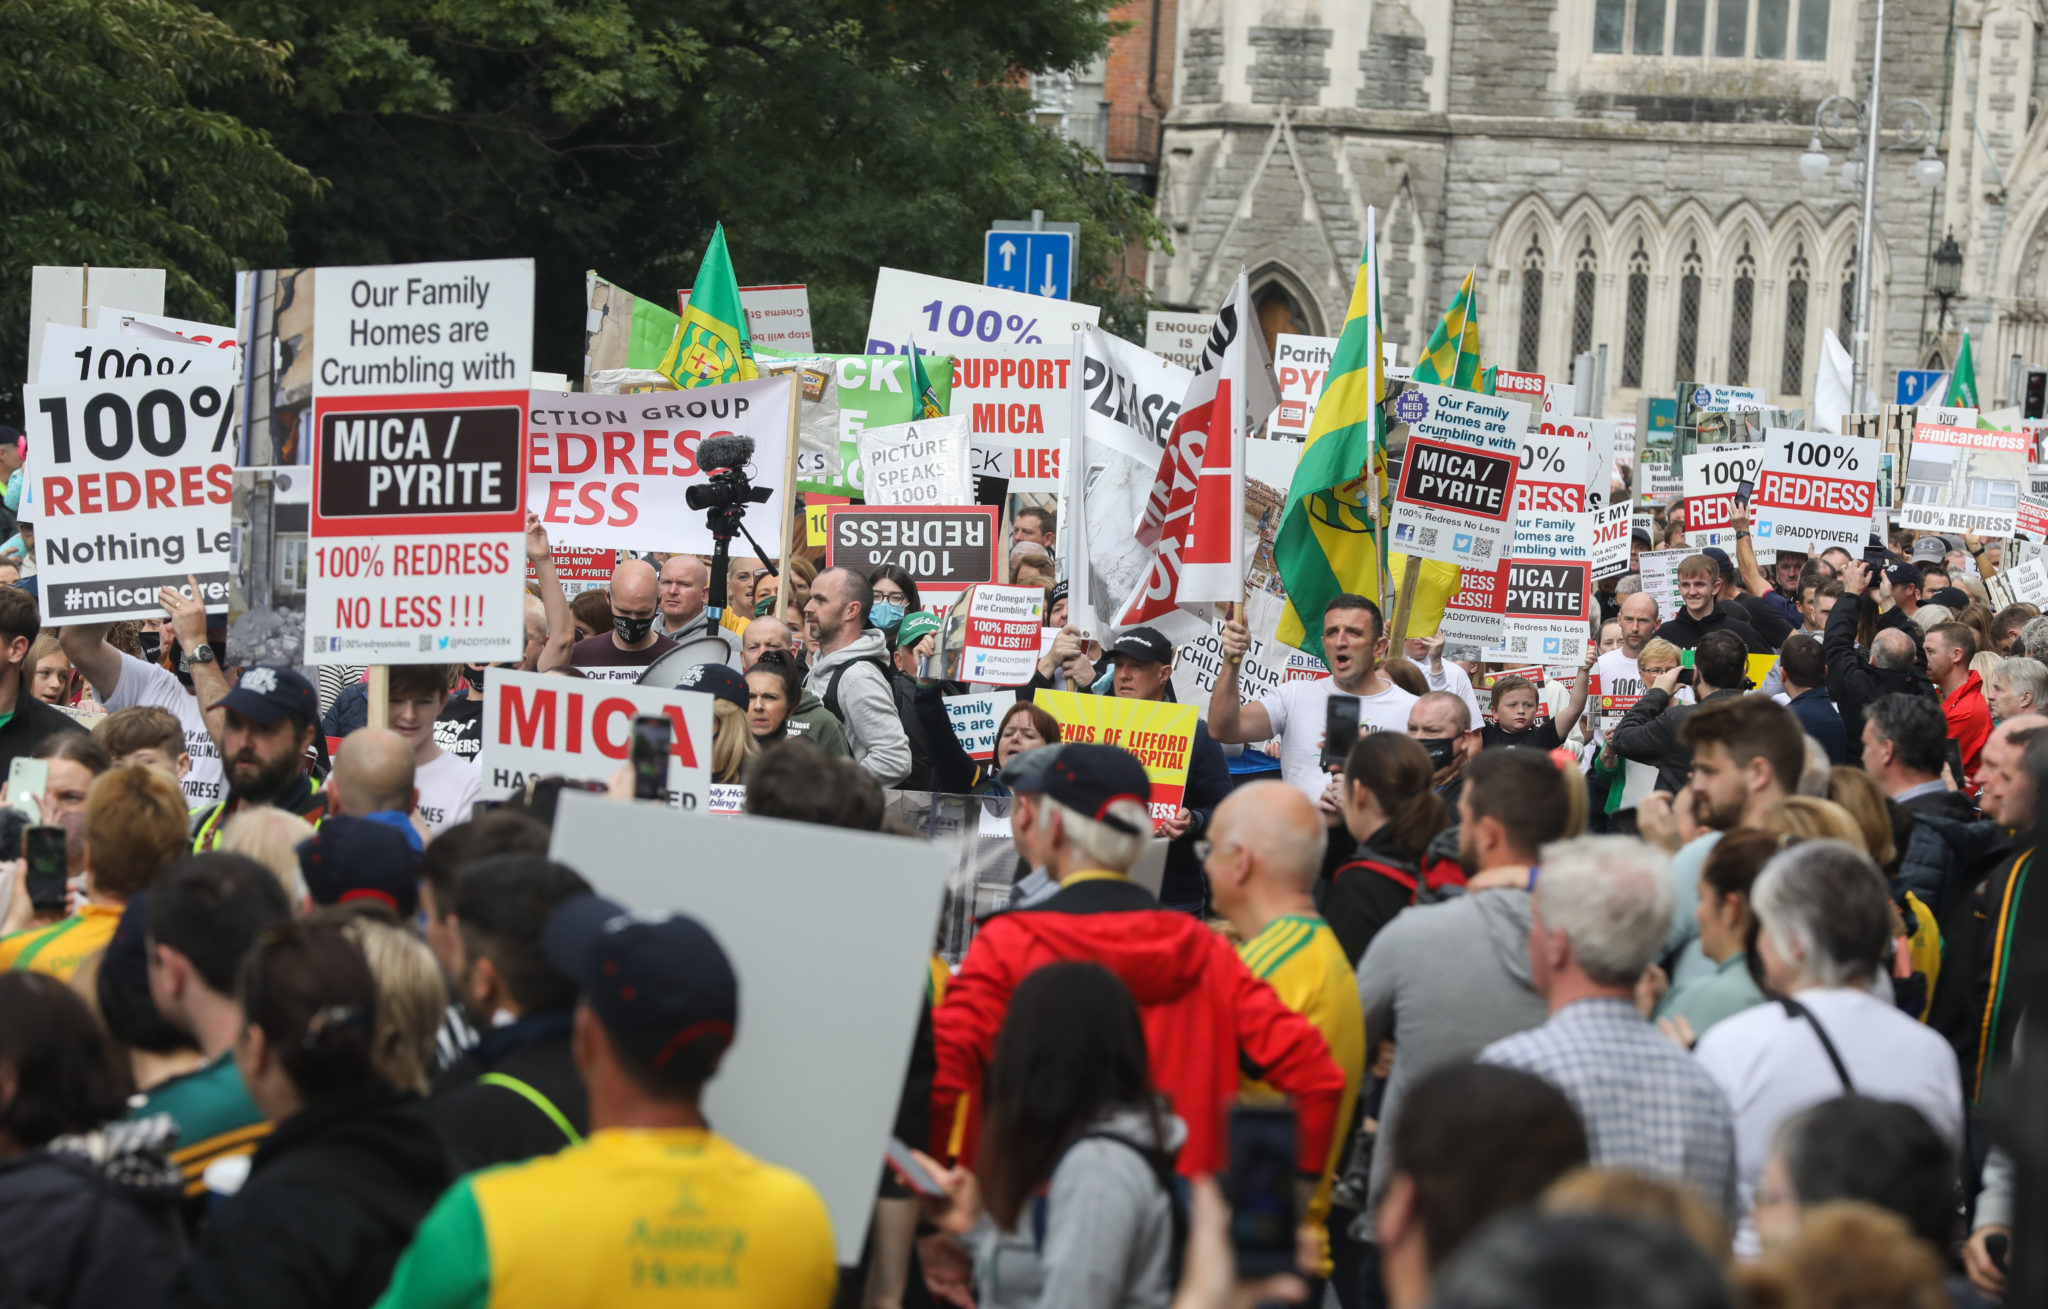 Mica protestors as they marched from the Garden of Remembrance to Leinster House in Dublin, 08-10-2021. Image: Leah Farrell/RollingNews